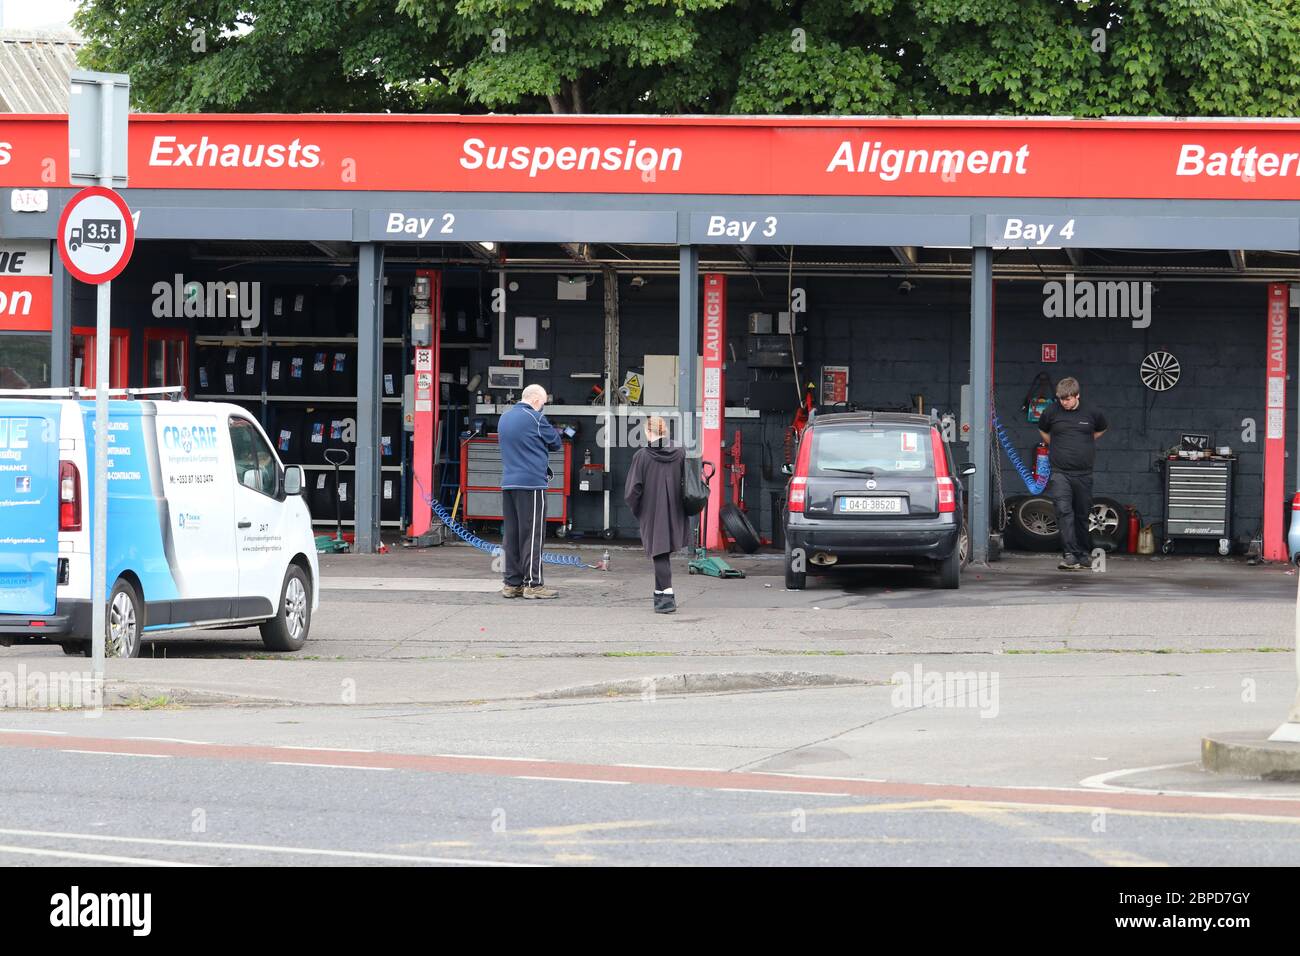 (200519) -- DUBLIN, May 19, 2020 (Xinhua) -- People are seen at a repair shop for cars in Dublin, Ireland, May 18, 2020. Ireland on Monday entered into what it called Phase-One stage in easing the restrictions which were imposed some 50 days ago following the COVID-19 outbreak in the country. During the stage, more businesses are allowed to be reopened in the country. They include hardware stores, homeware shops, garden centers, farmers' markets, repair shops for cars, motorbikes and bicycles, and optical shops. Restaurants like McDonald's and Burger King are also permitted to provide drive Stock Photo